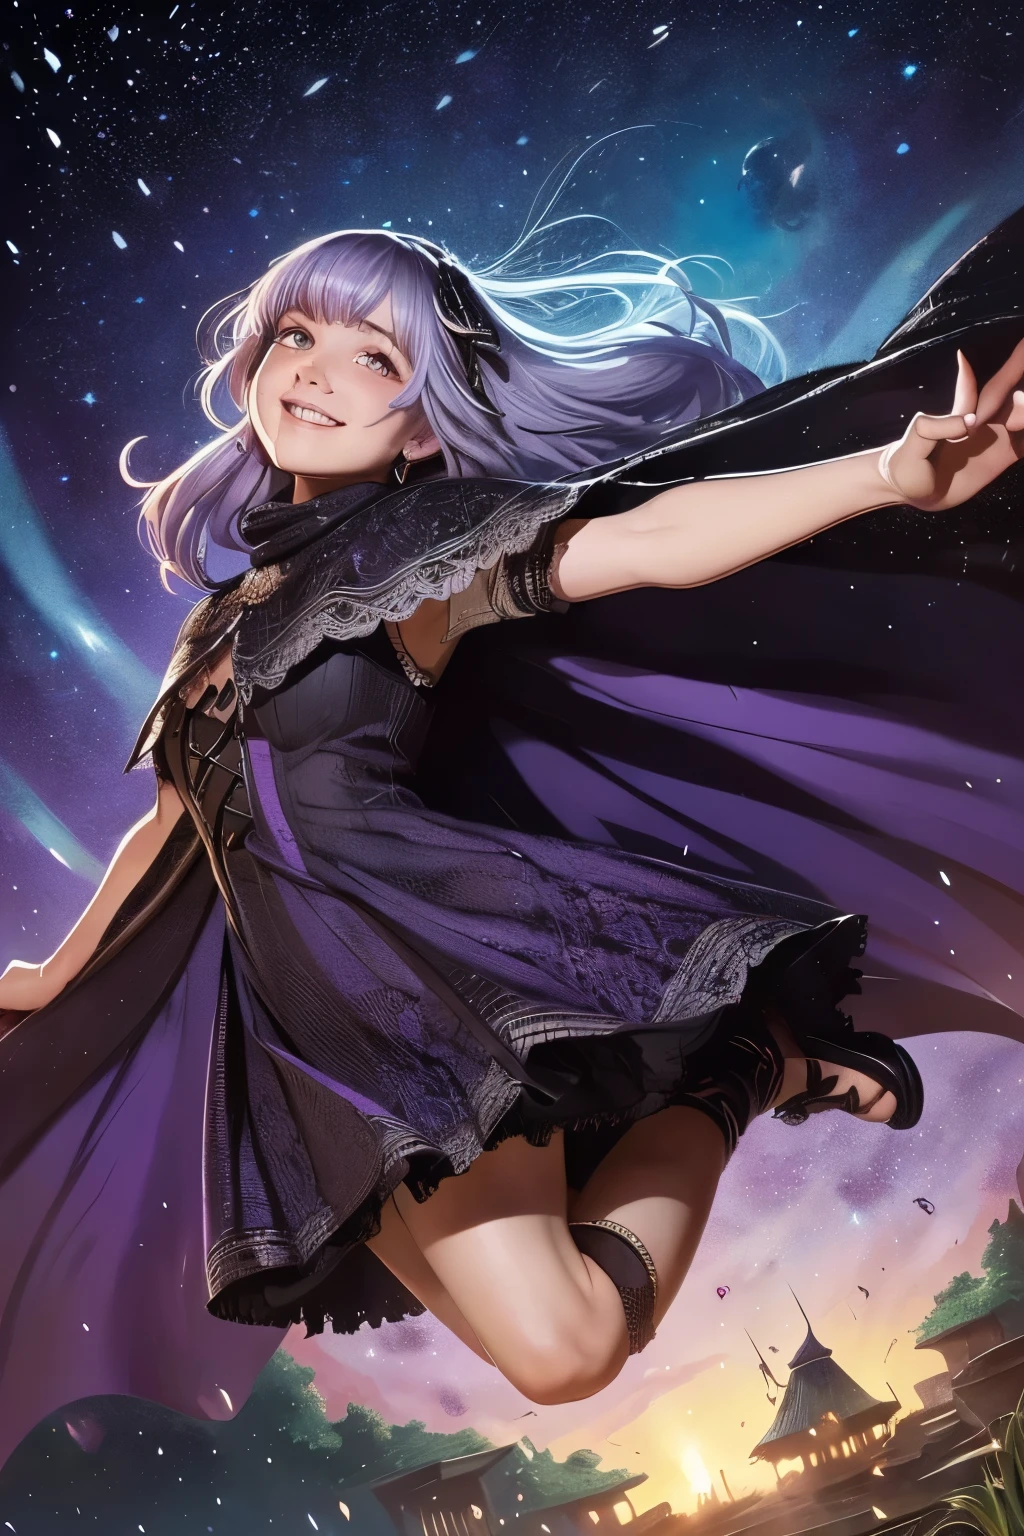 (Ultra-detailed face, smile), (Fantasy Illustration with Gothic & Ukiyo-e & Comic Art), (A young-aged dark elf woman with silver hair, blunt bangs, very long disheveled hair and dark purple skin, lavender eyes), (She holds a colorful scarf, wears a lacy, geometric orange cape dress, and laced sandals), BREAK (She is dancing flamenco in the heavy rain, looking up at the sky, jumping and turning in big, bold poses. Her body is glistening)